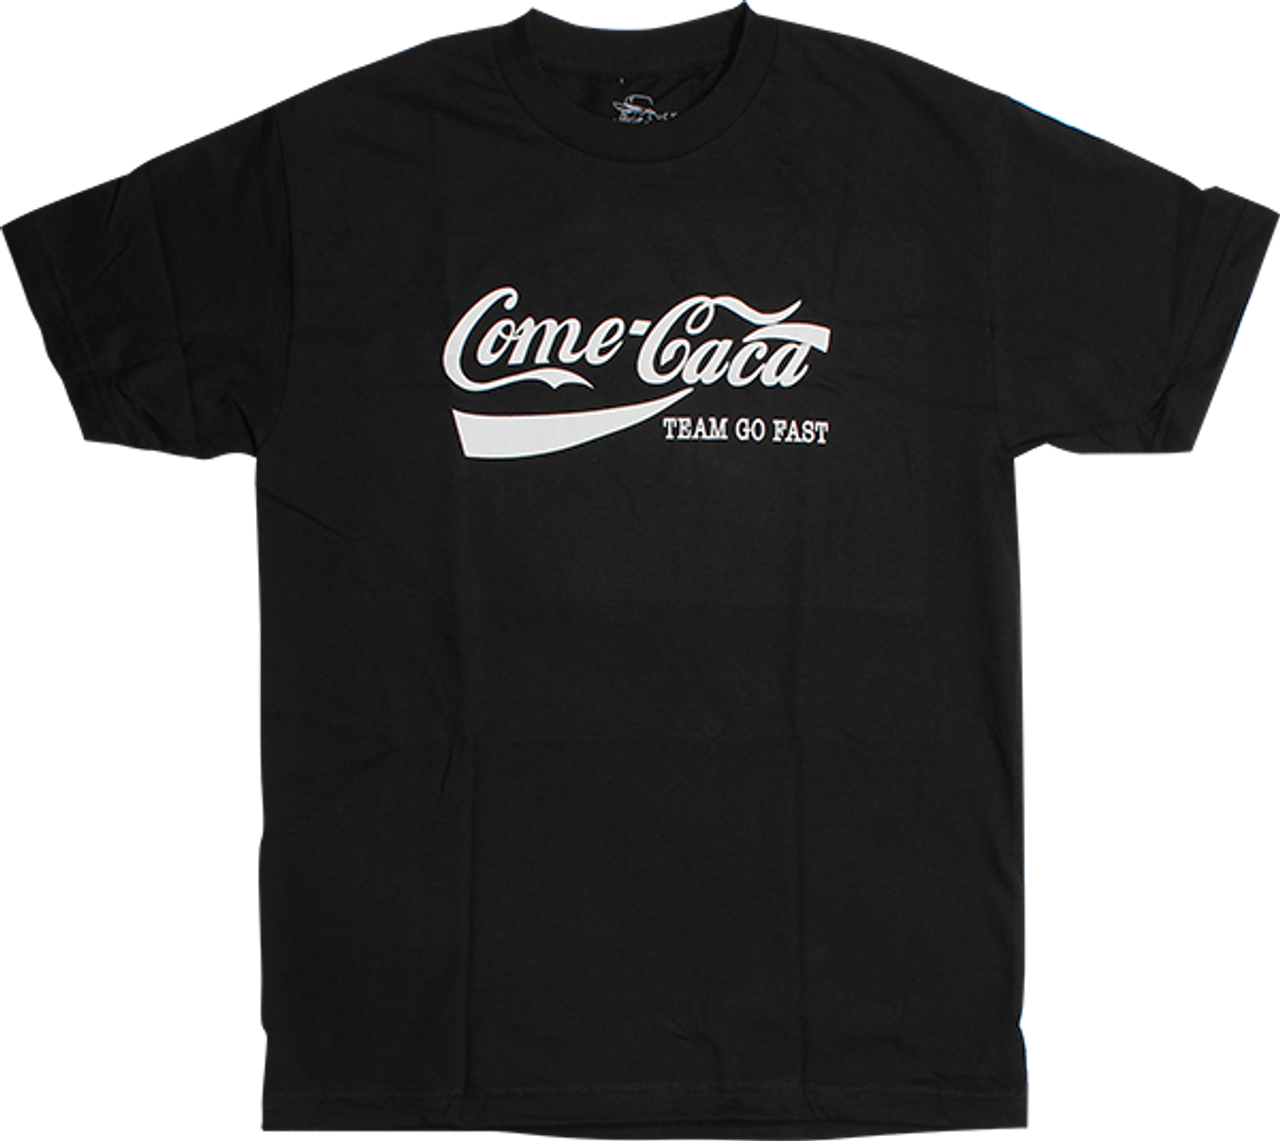 HARD LUCK COME CACA SS TSHIRT LARGE  BLACK